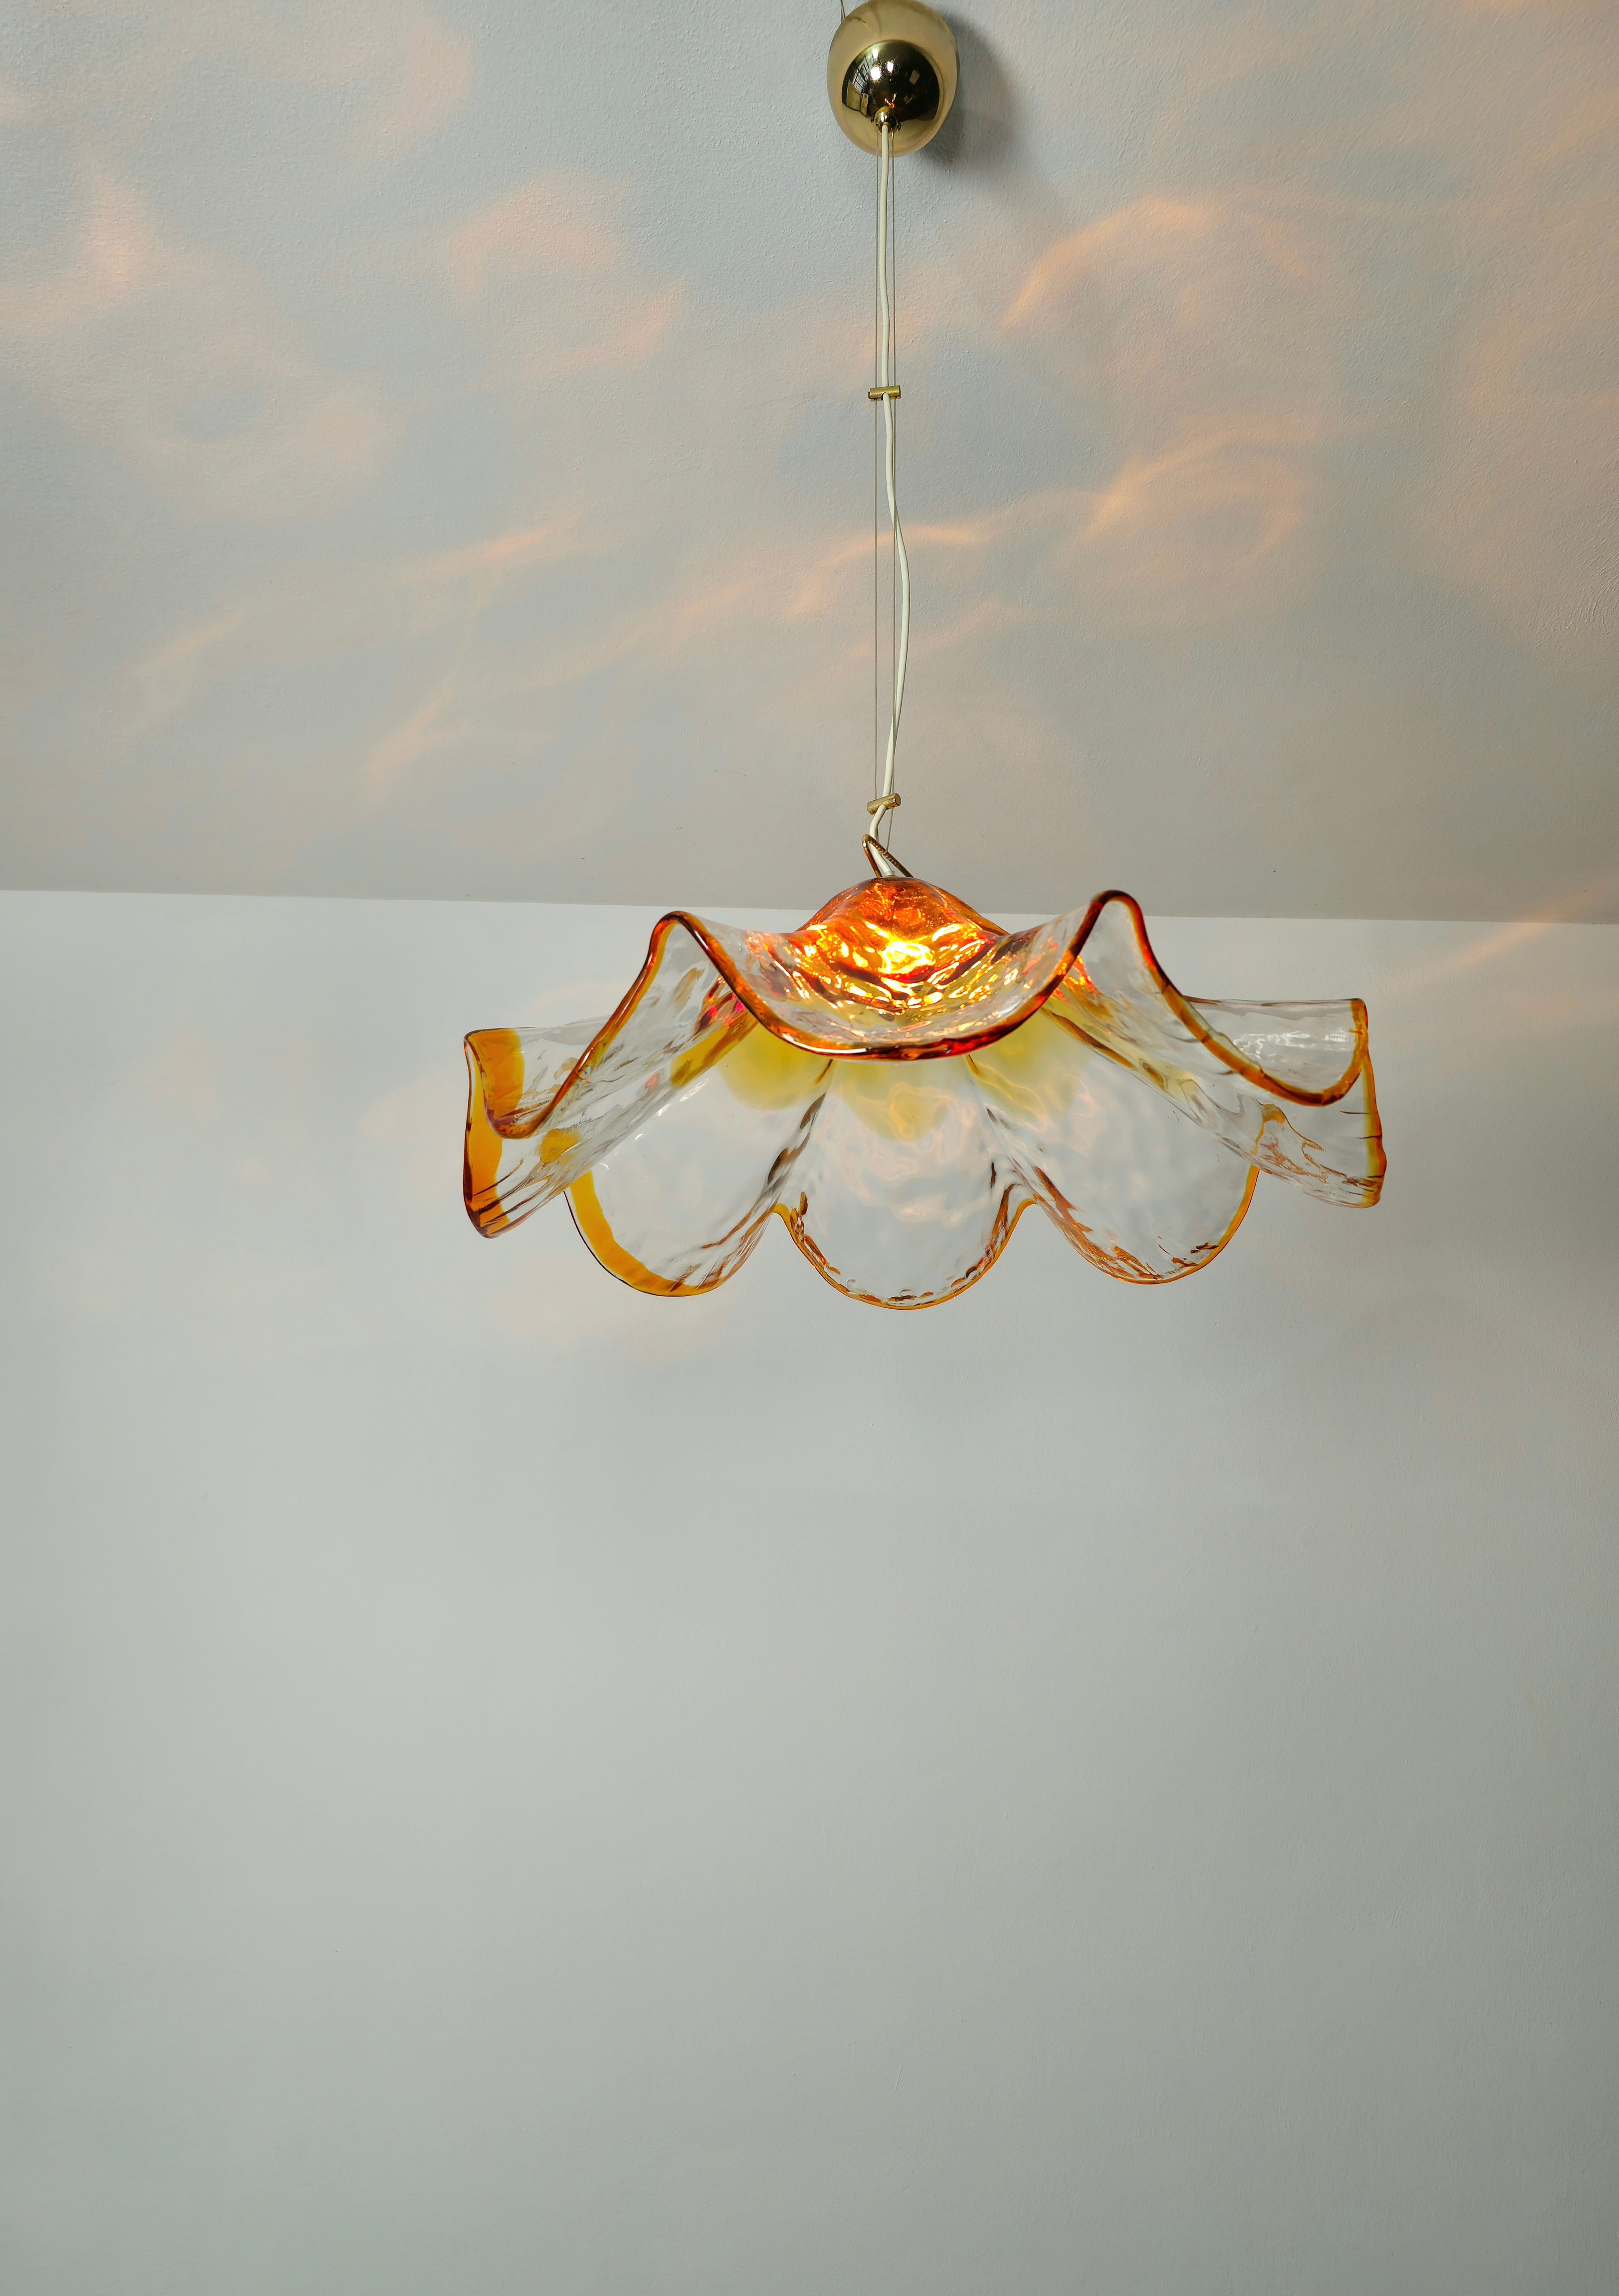 Suspension lamp with 1 E27 light produced in the 1960s in Italy by the Murano company La Murrina. The suspension lamp was made with a particular curved Murano glass in caramel and transparent shades with golden metal accessories.


Note: We try to